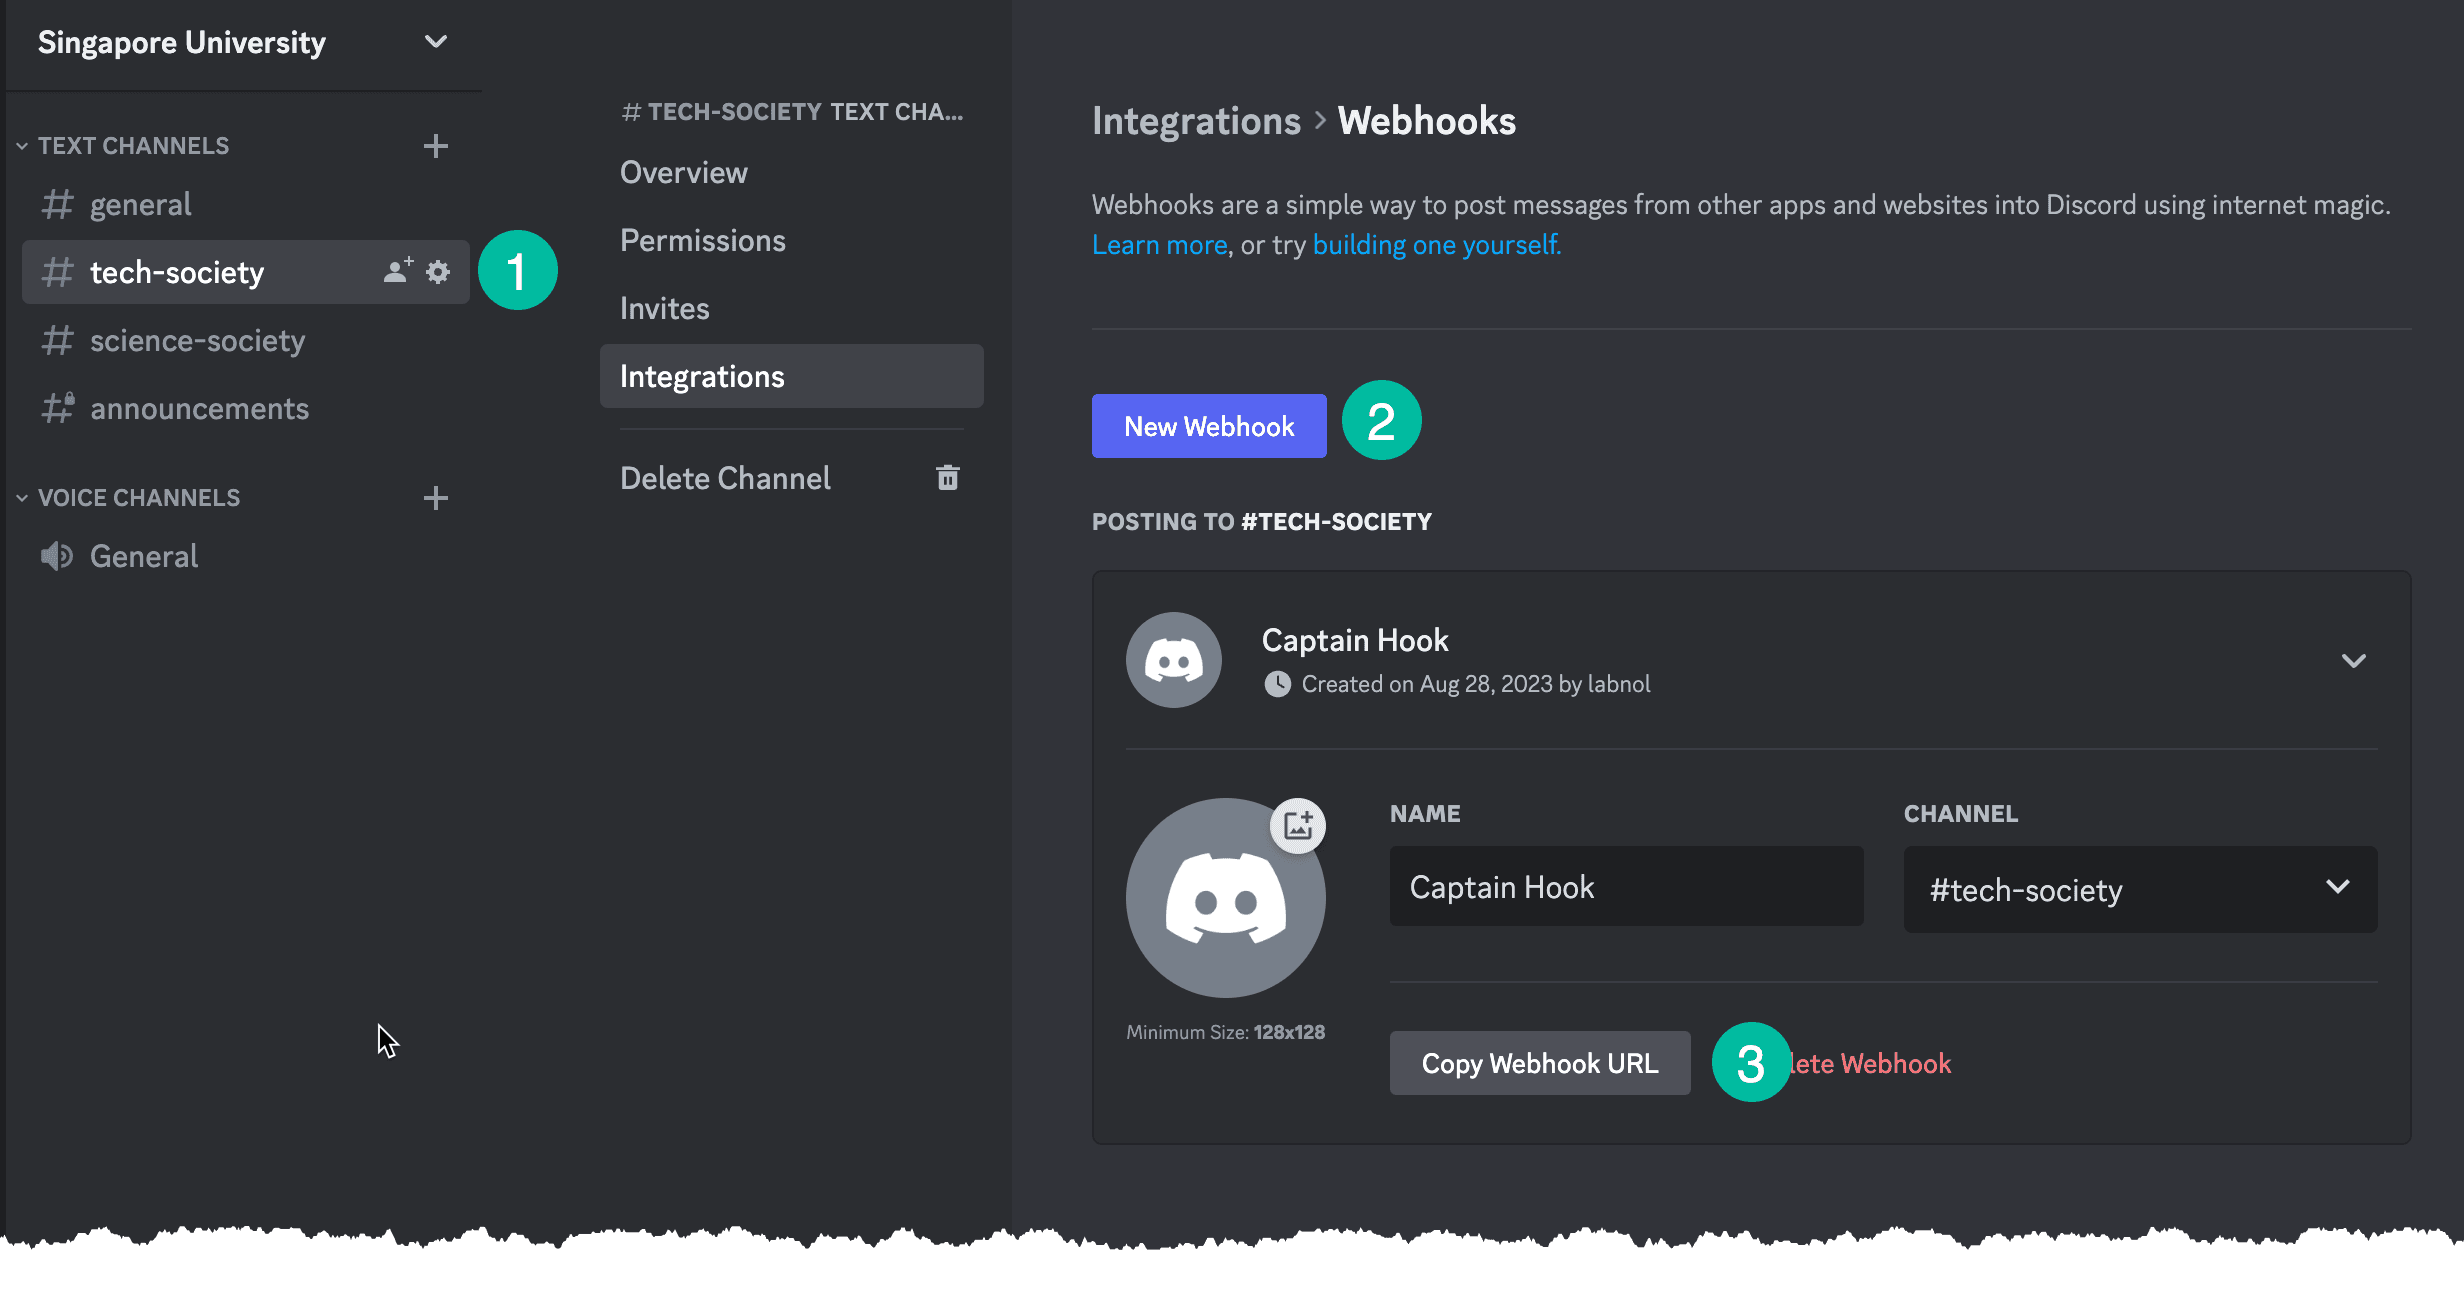 Why Does This Webhook Spam Messages? - Scripting Support